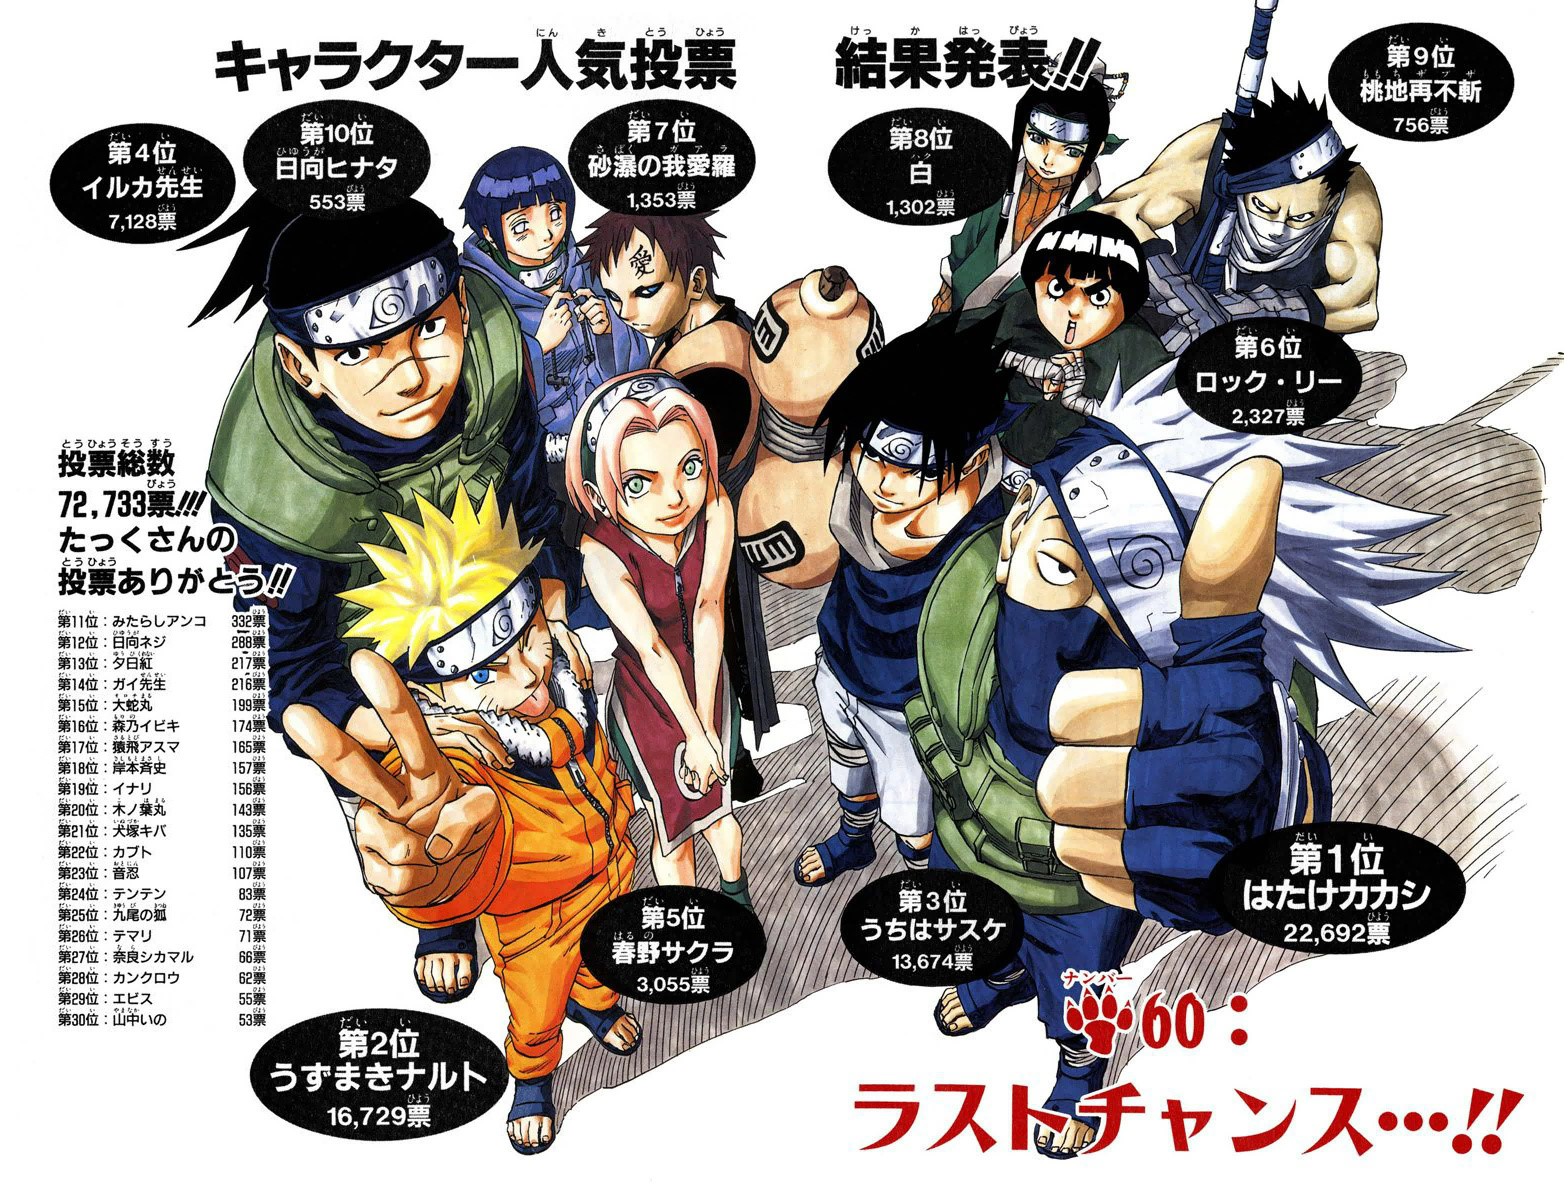 Who is the least popular Naruto character?